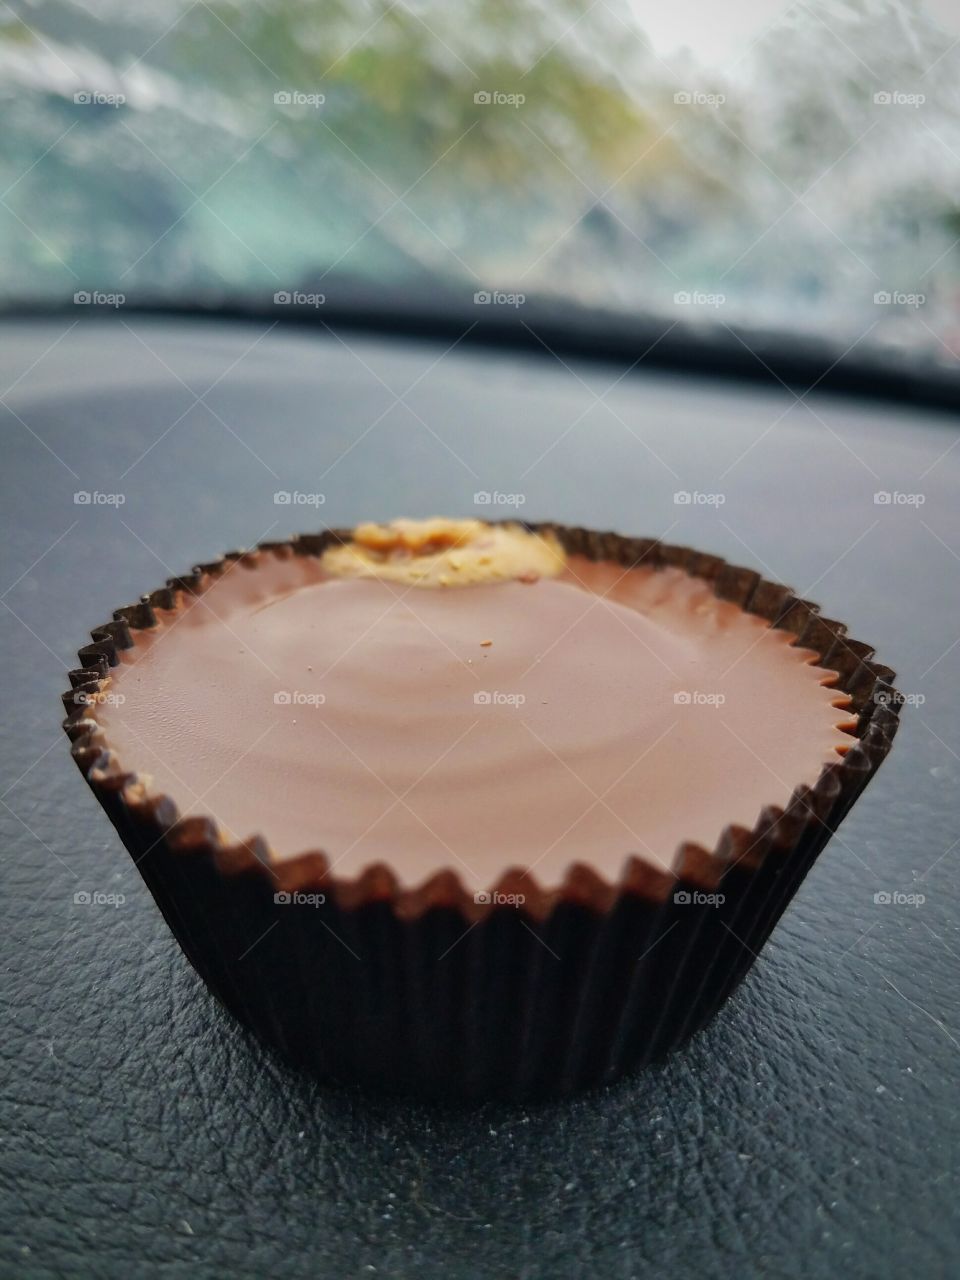 Peanut butter cup imperfection